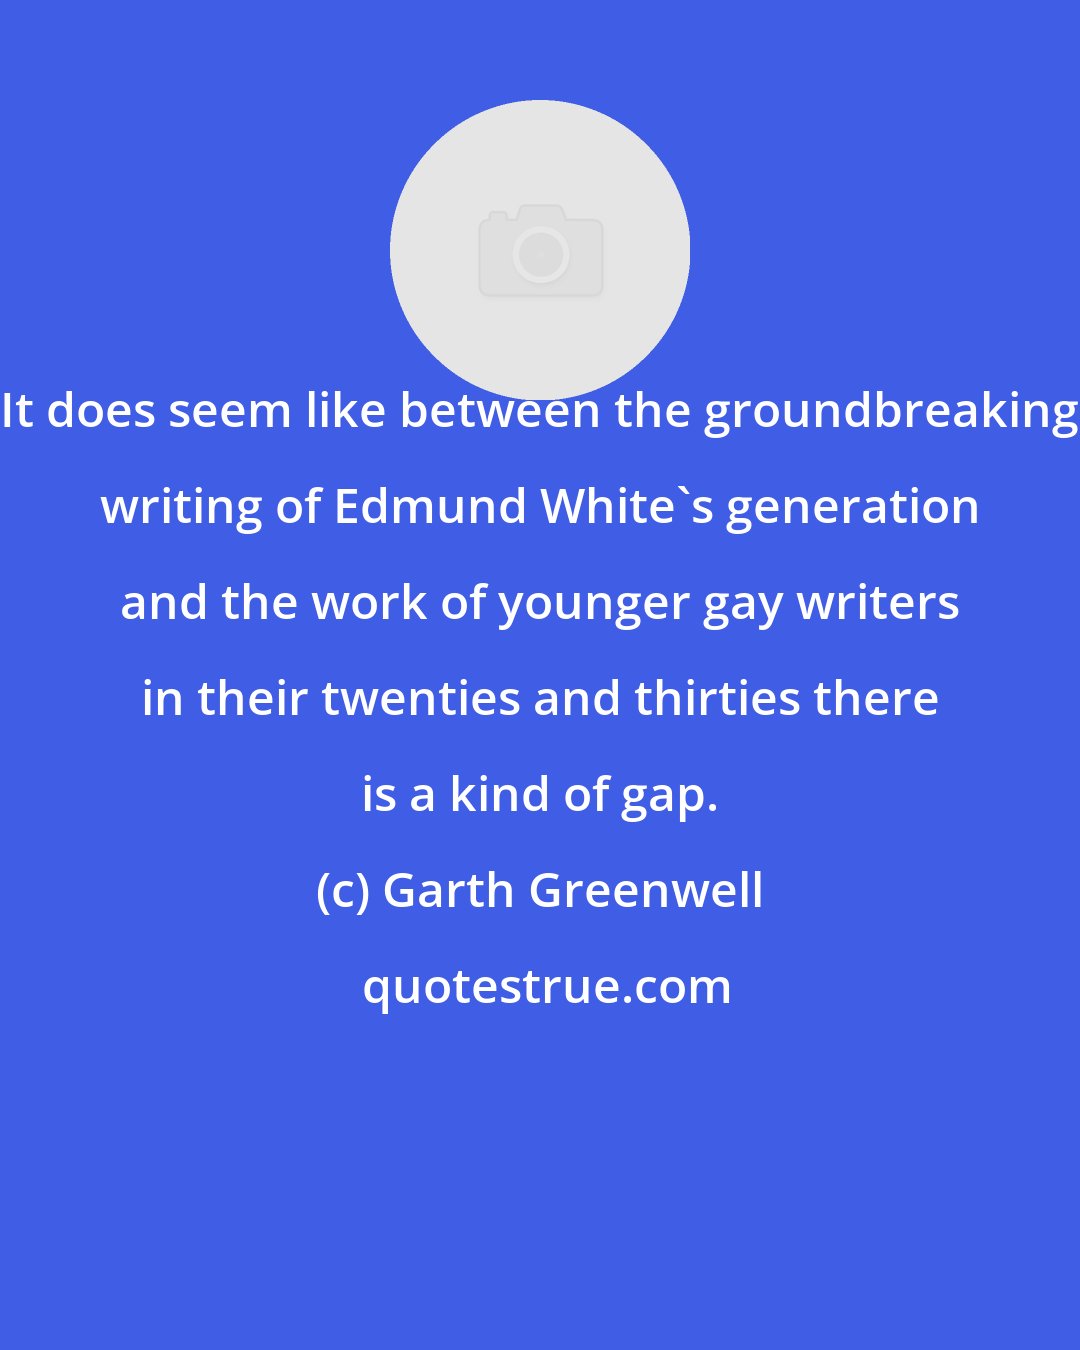 Garth Greenwell: It does seem like between the groundbreaking writing of Edmund White's generation and the work of younger gay writers in their twenties and thirties there is a kind of gap.